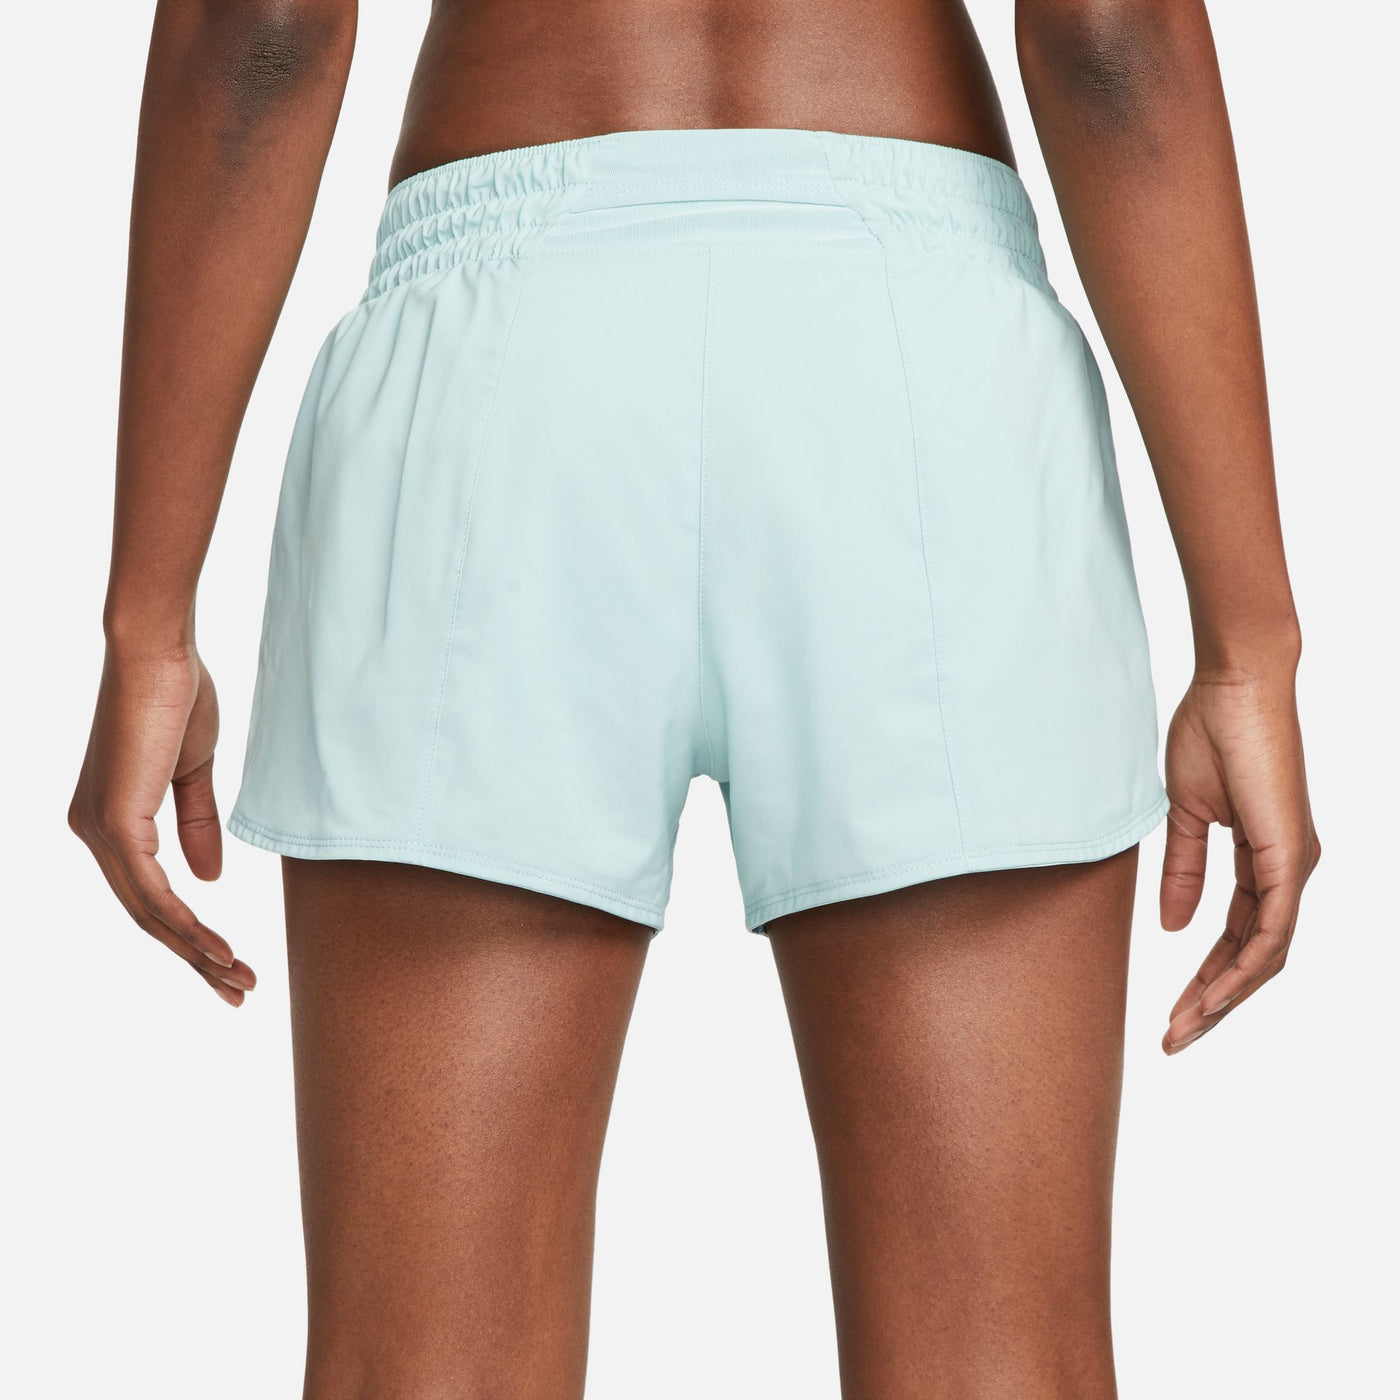 Women's Nike One Dri-FIT Mid-Rise 3" Brief-Lined Shorts - DX6010-309